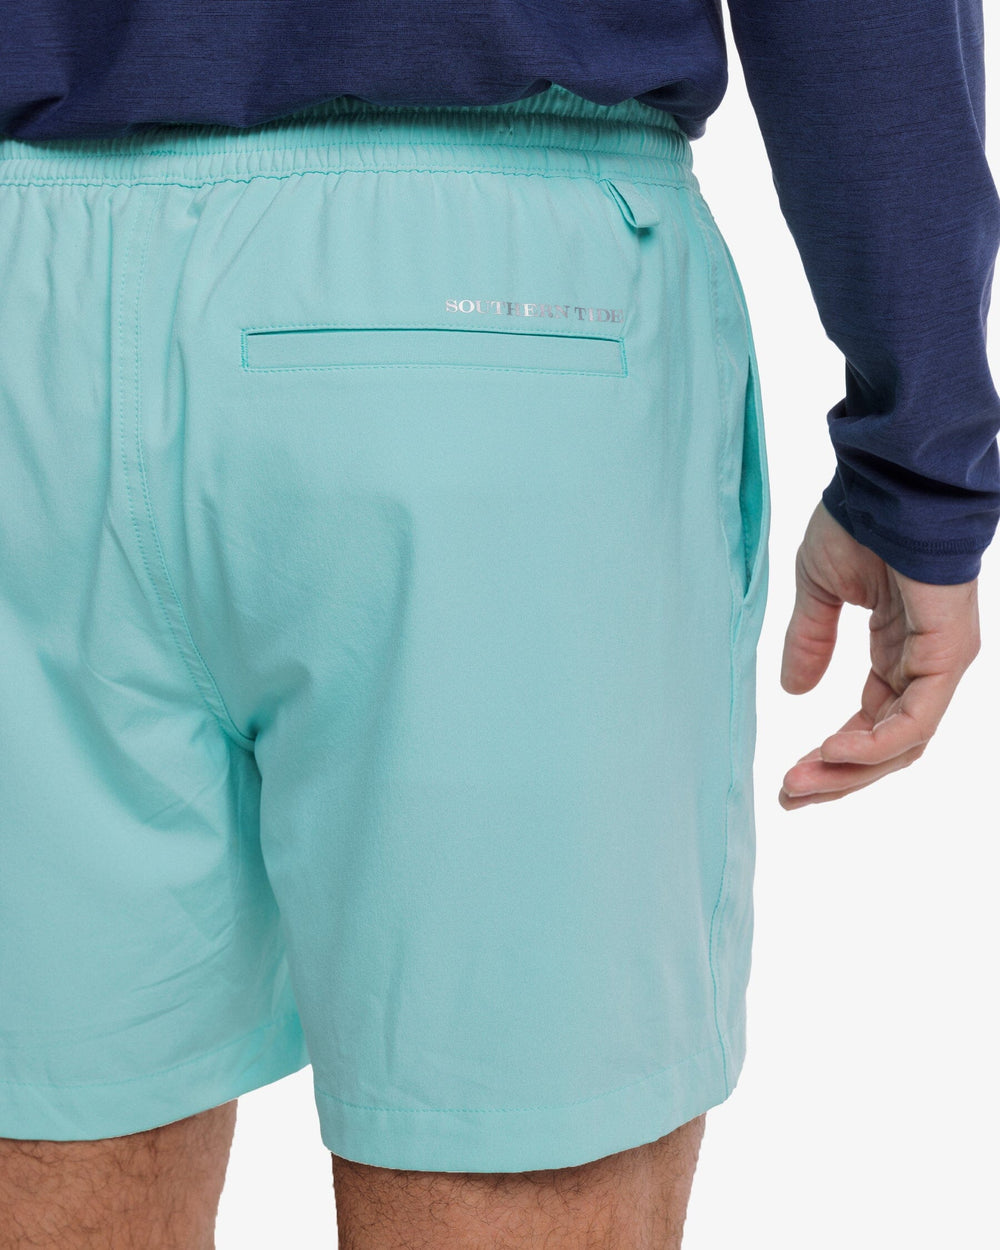 The model detail view of the Men's Rip Channel 6 Inch Performance Short by Southern Tide - Mint